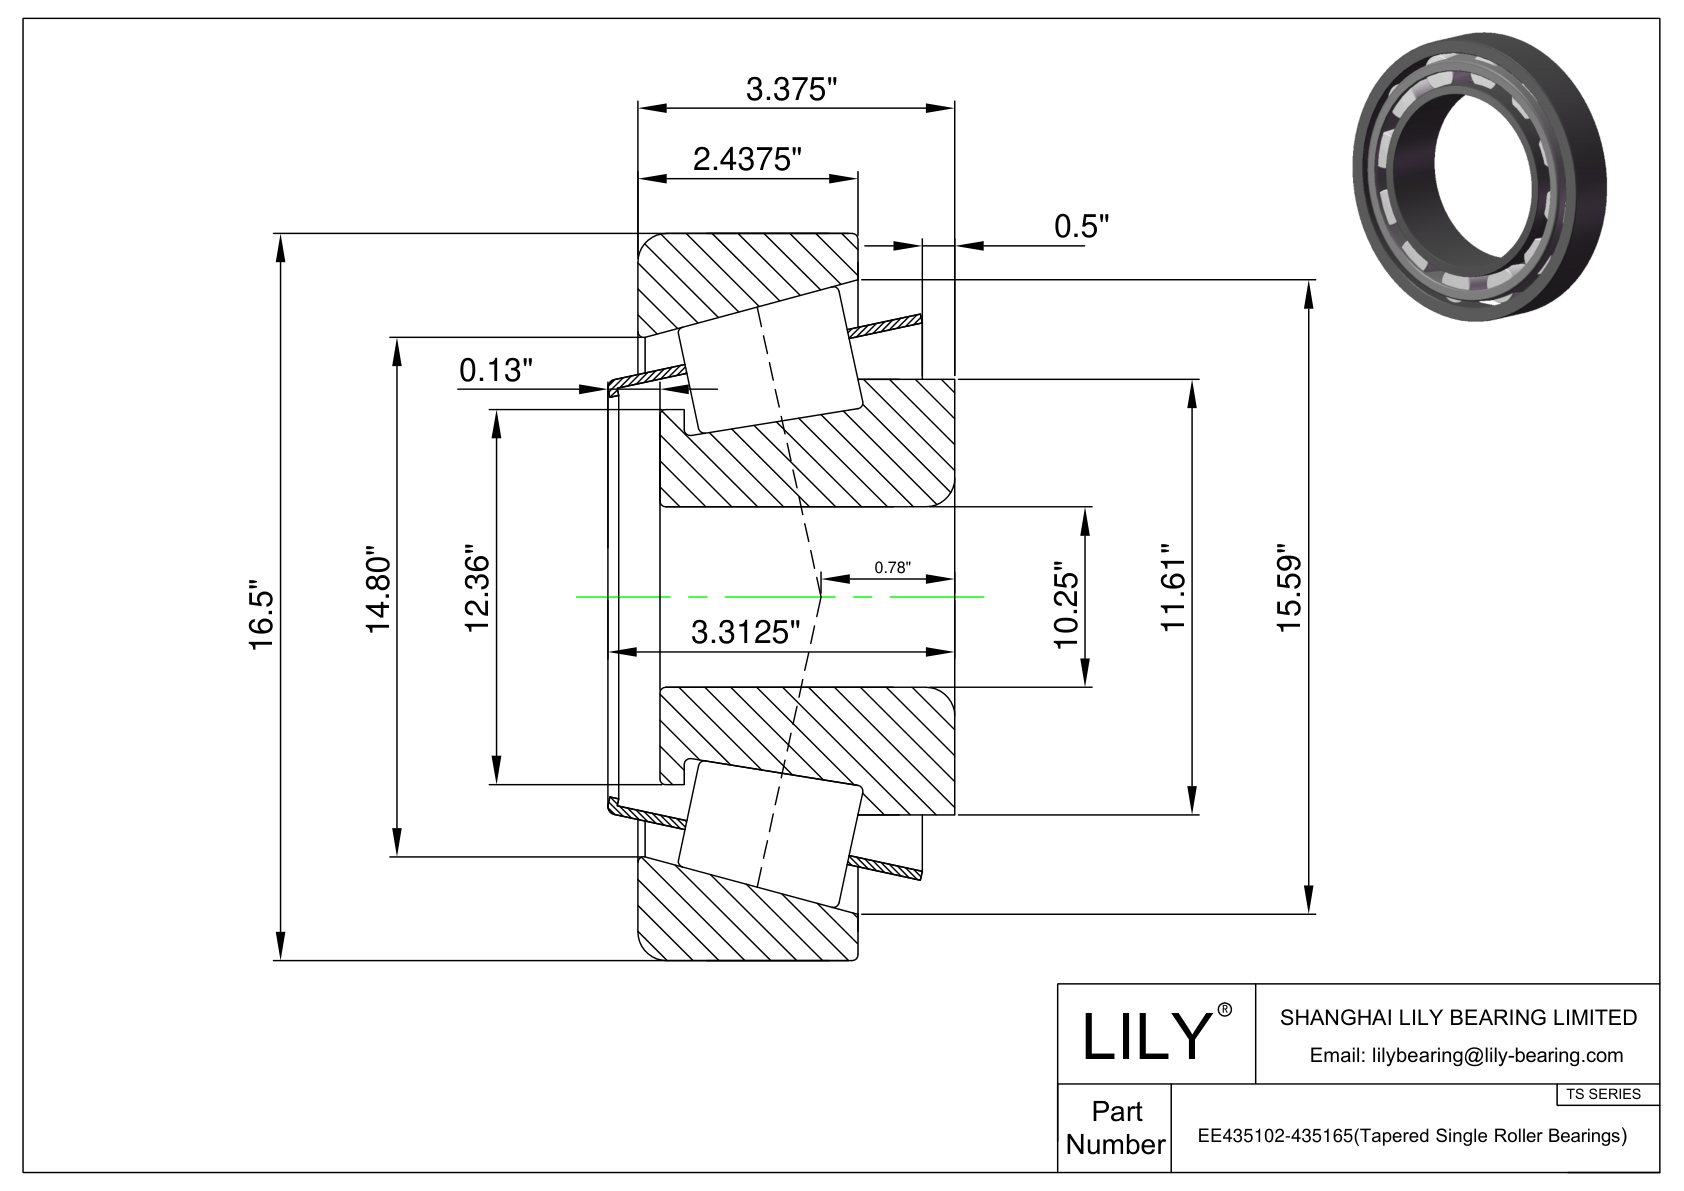 EE435102-435165 TS (Tapered Single Roller Bearings) (Imperial) cad drawing